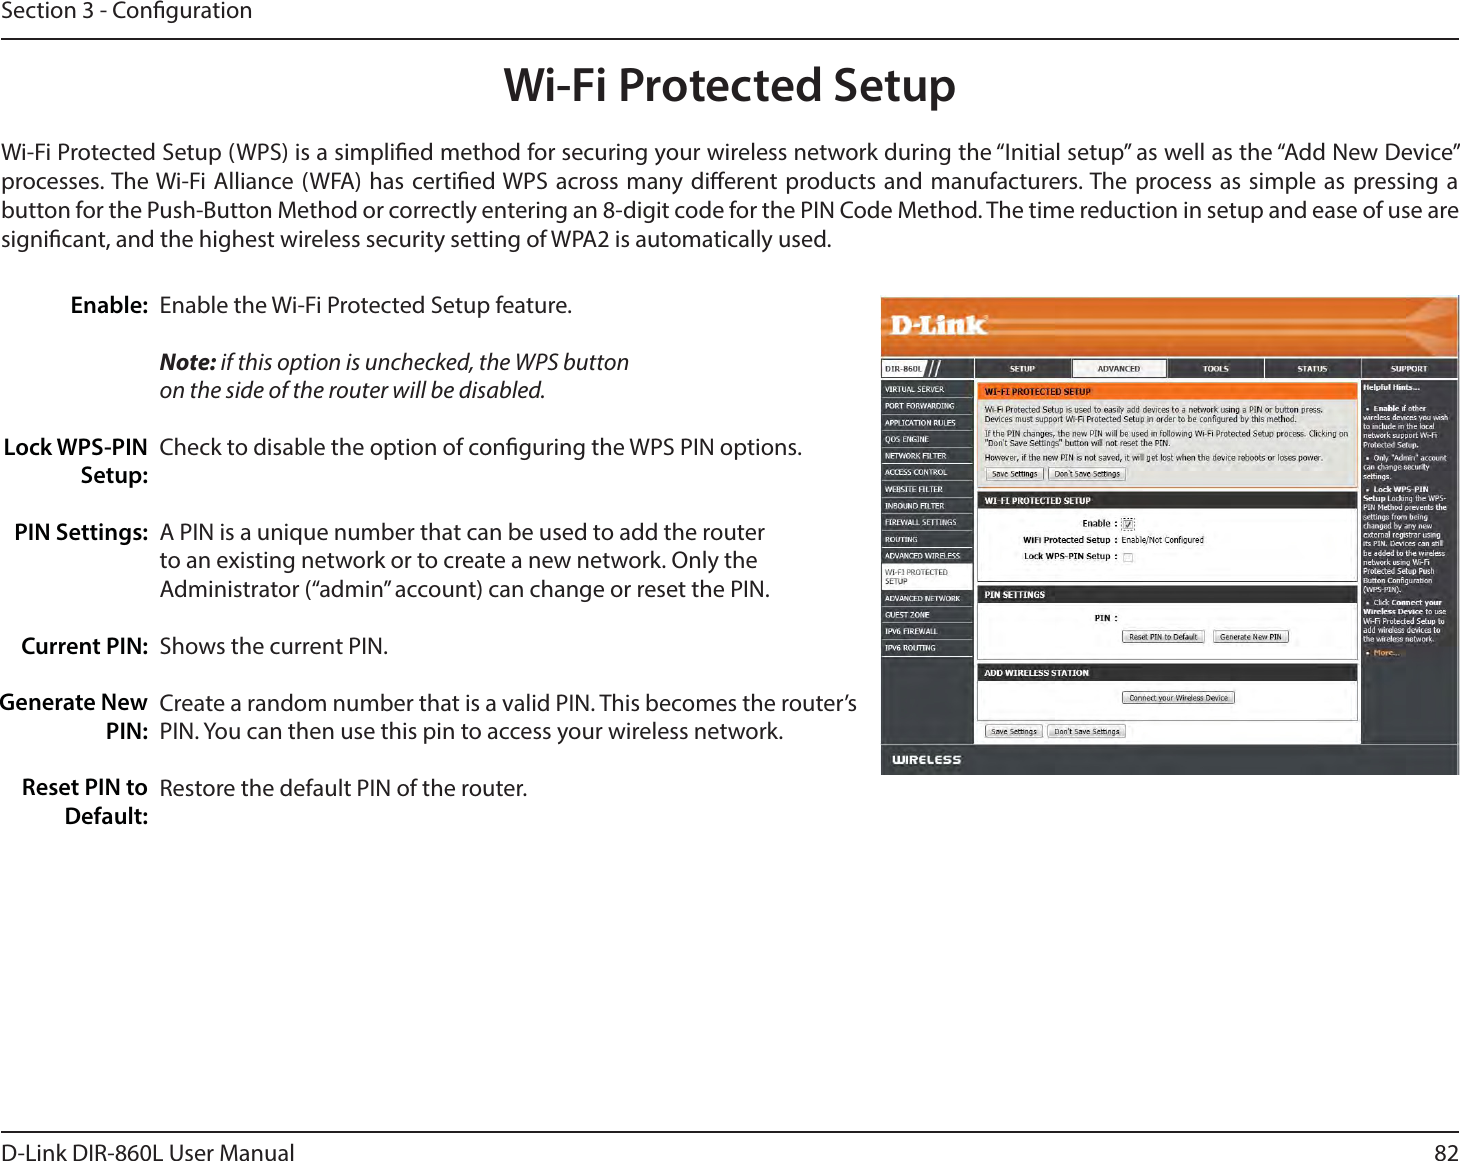 82D-Link DIR-860L User ManualSection 3 - CongurationWi-Fi Protected SetupEnable the Wi-Fi Protected Setup feature. Note: if this option is unchecked, the WPS button on the side of the router will be disabled.Check to disable the option of conguring the WPS PIN options.A PIN is a unique number that can be used to add the router to an existing network or to create a new network. Only the Administrator (“admin” account) can change or reset the PIN. Shows the current PIN. Create a random number that is a valid PIN. This becomes the router’s PIN. You can then use this pin to access your wireless network.Restore the default PIN of the router. Enable:Lock WPS-PIN Setup:PIN Settings:Current PIN:Generate New PIN:Reset PIN to Default:Wi-Fi Protected Setup (WPS) is a simplied method for securing your wireless network during the “Initial setup” as well as the “Add New Device” processes. The Wi-Fi Alliance (WFA) has certied WPS across many dierent products and manufacturers. The process as simple as pressing a button for the Push-Button Method or correctly entering an 8-digit code for the PIN Code Method. The time reduction in setup and ease of use are signicant, and the highest wireless security setting of WPA2 is automatically used.